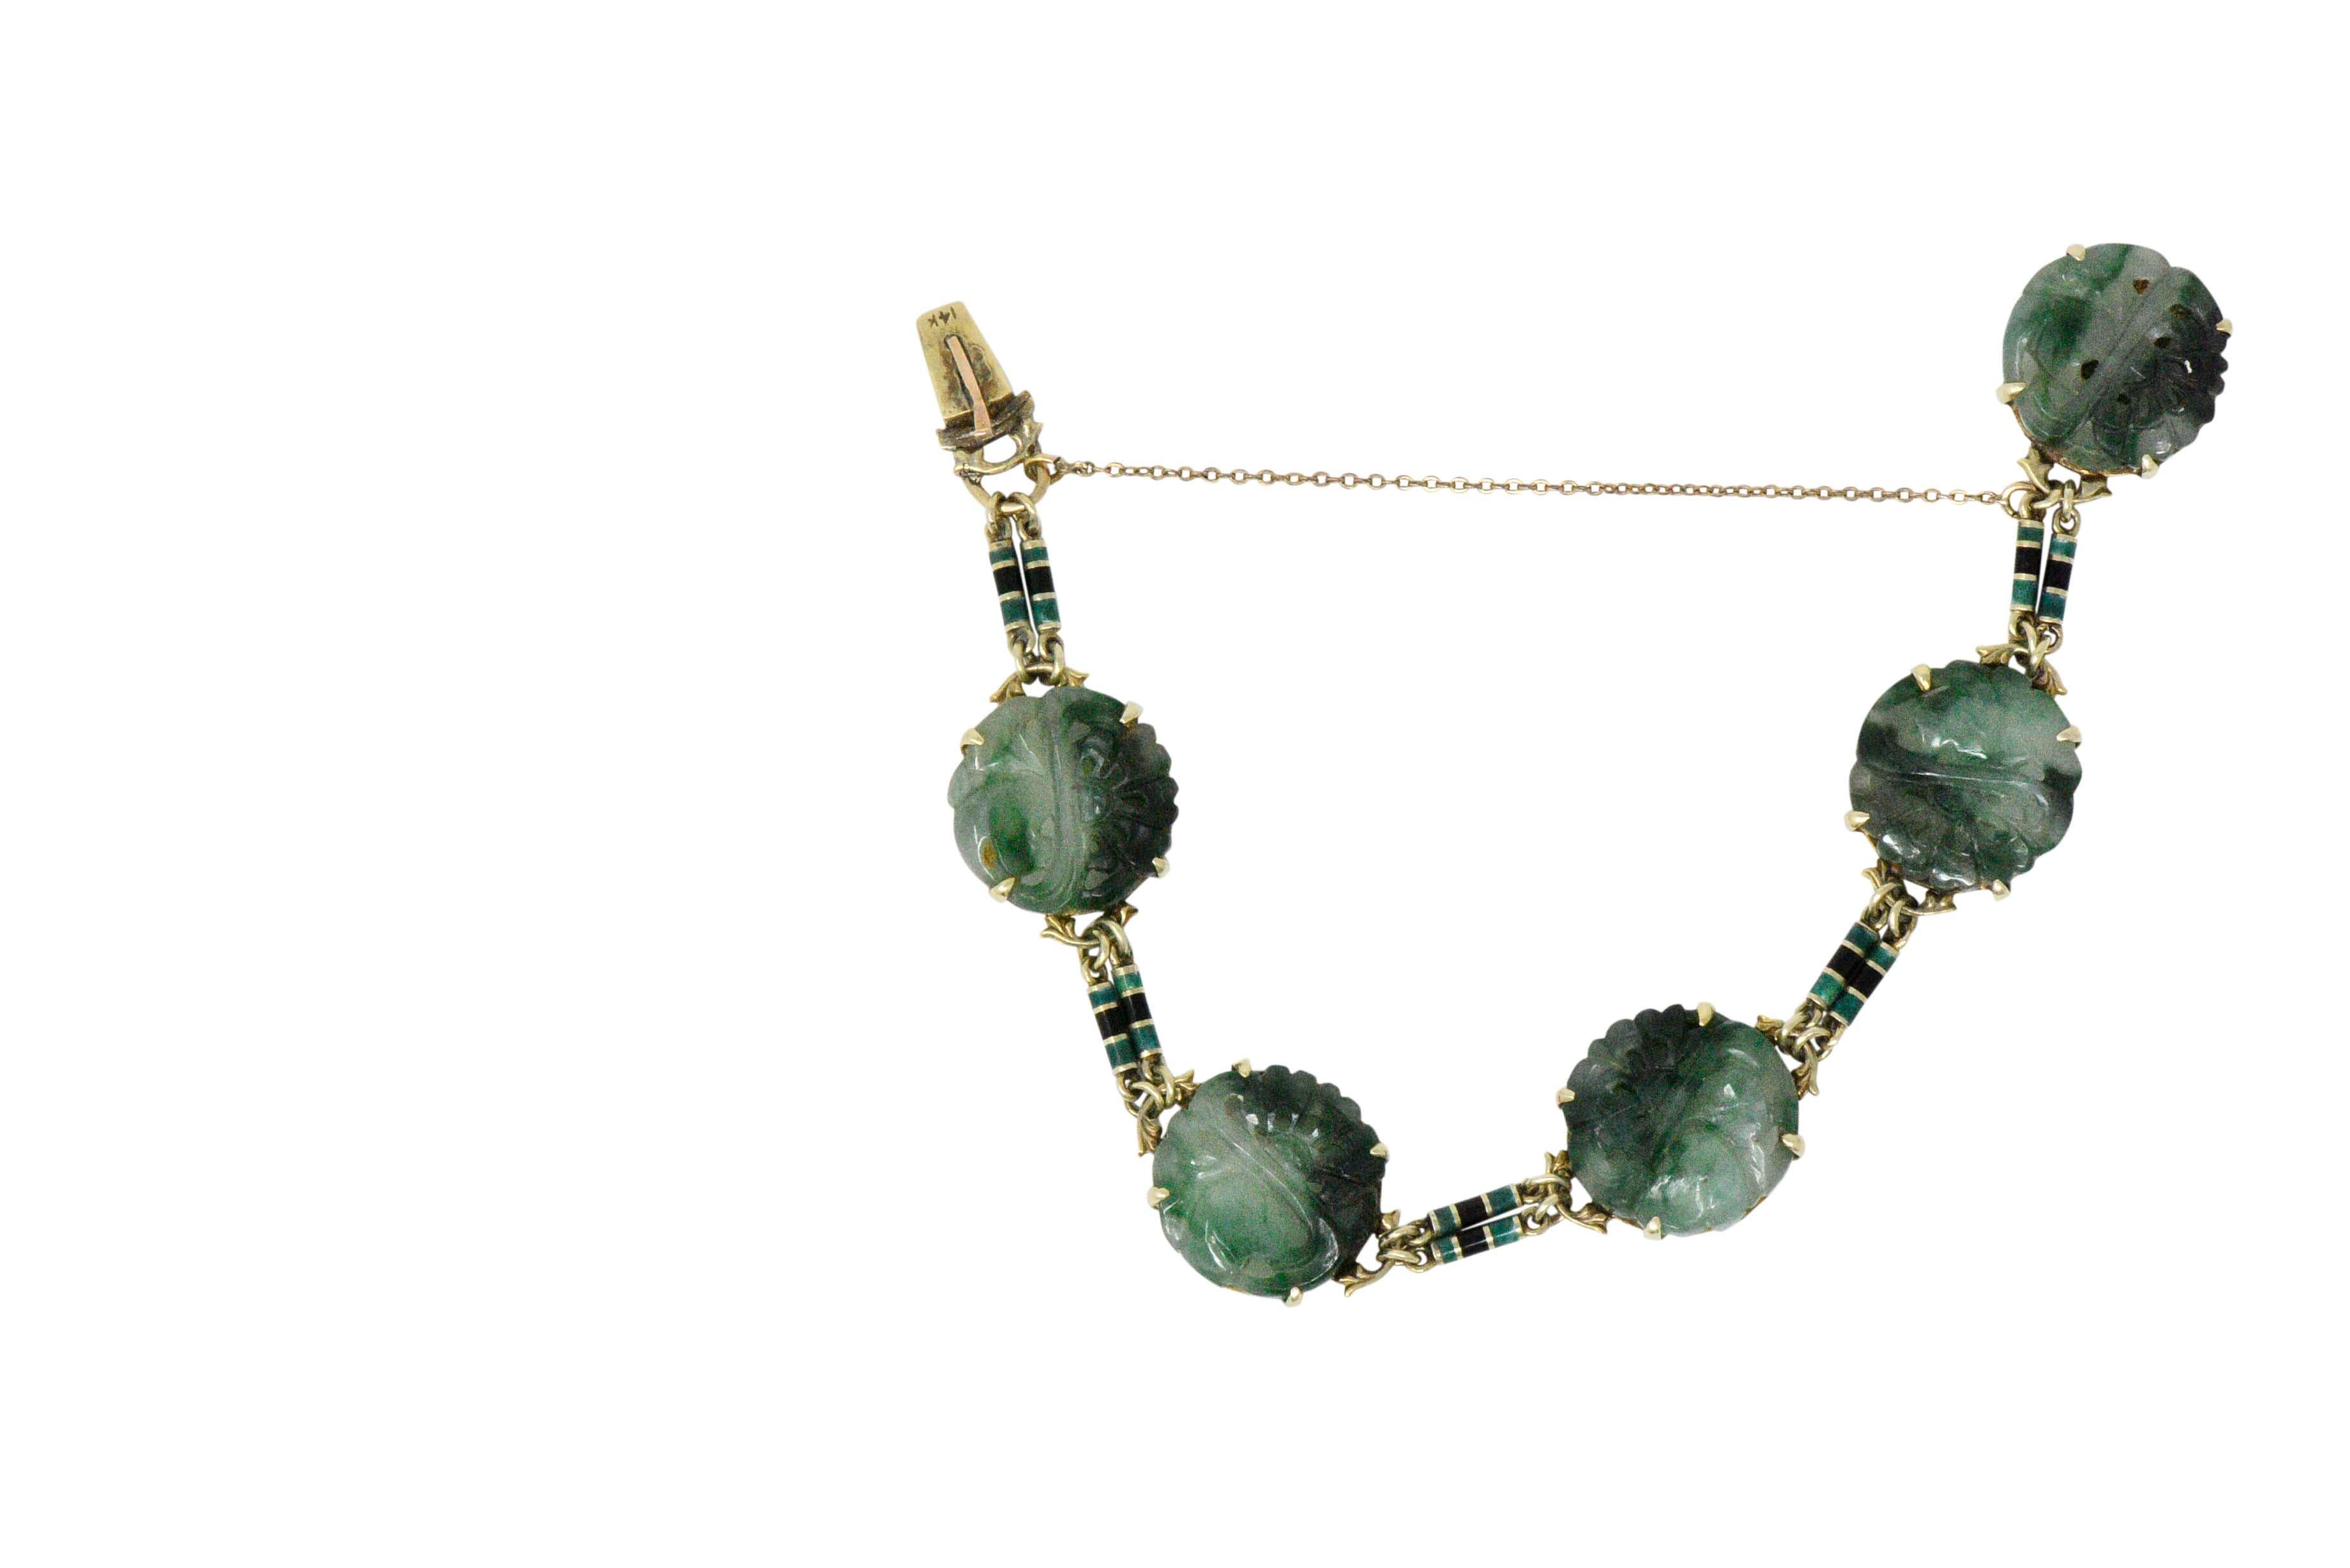 With five round carved jade disc links, dark green, green and white mottling 

Fun stripe green and black enamel spacer links 

Bright and colorful bracelet

Concealed clasp with safety chain

Length: 7 inches

Jade Disc Diameter: Approx. 16.5